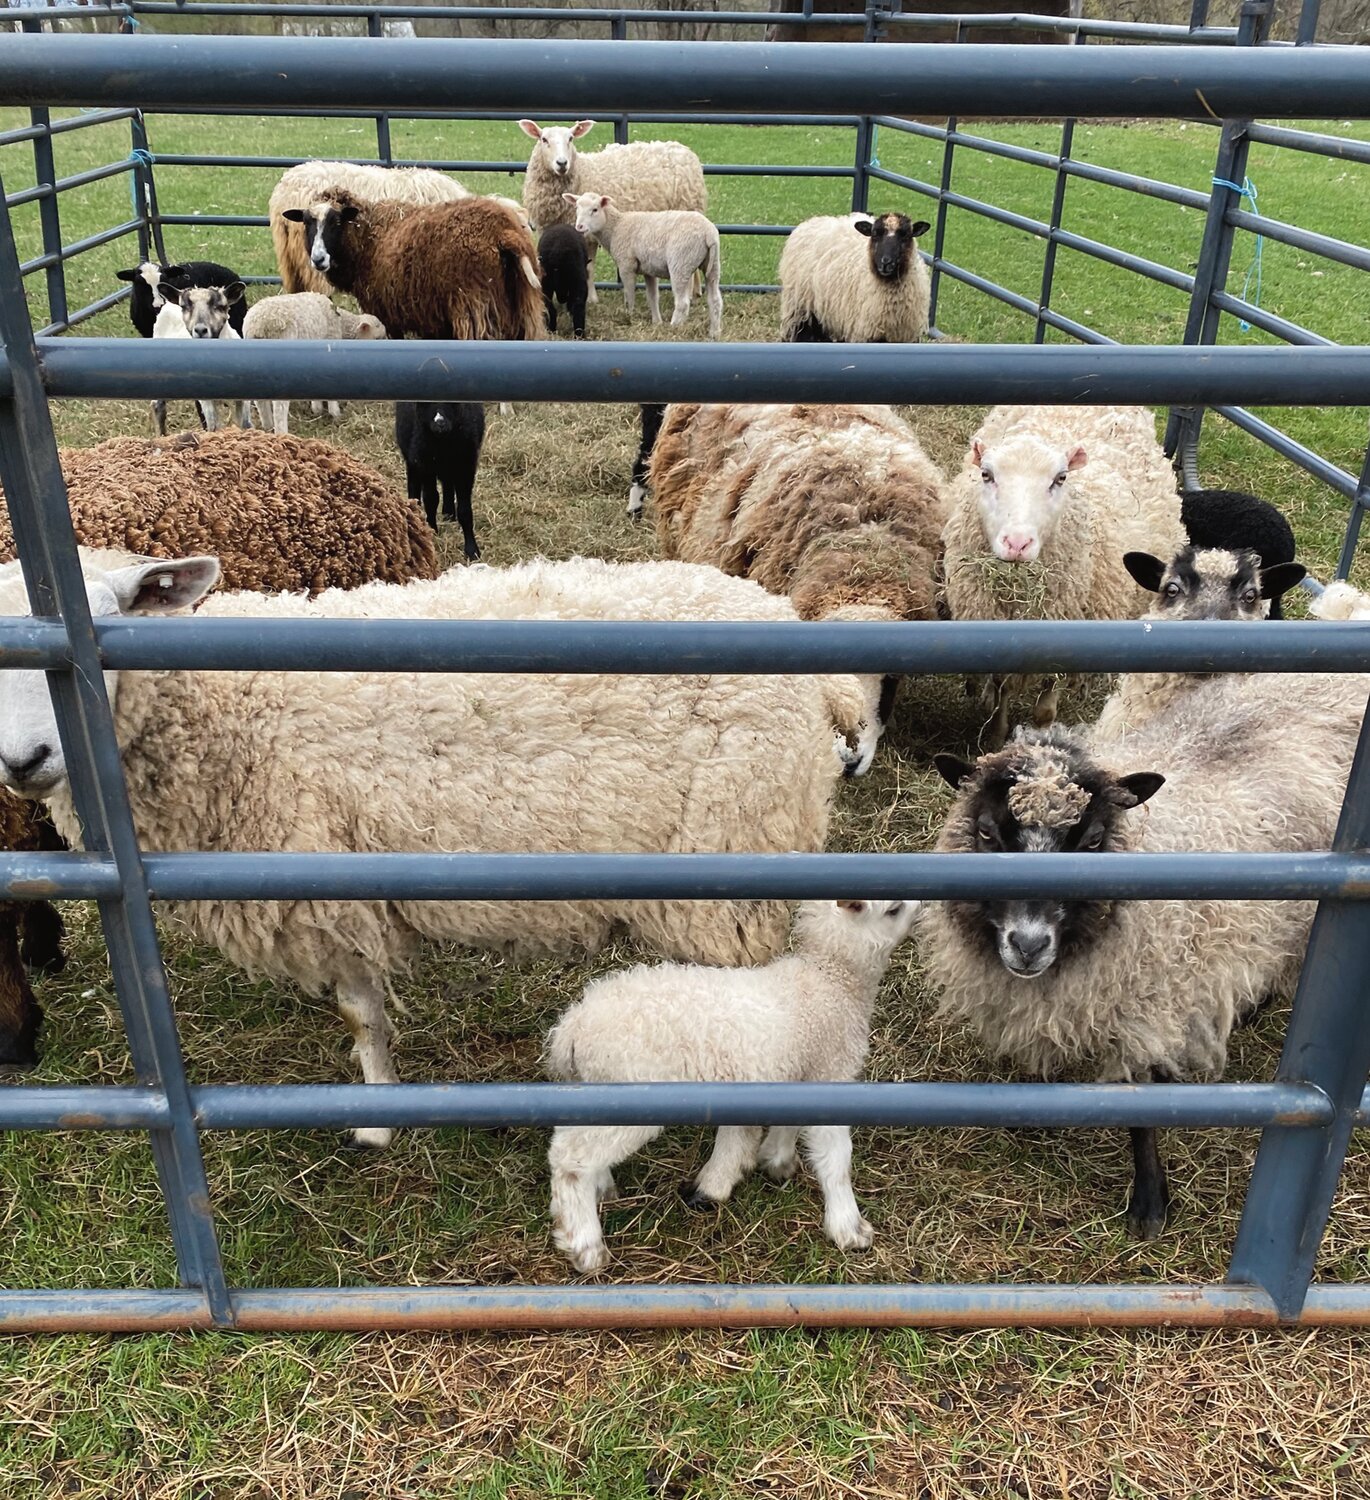 A flock of sheep is often penned prior to the arrival of a shearer for flow of work.